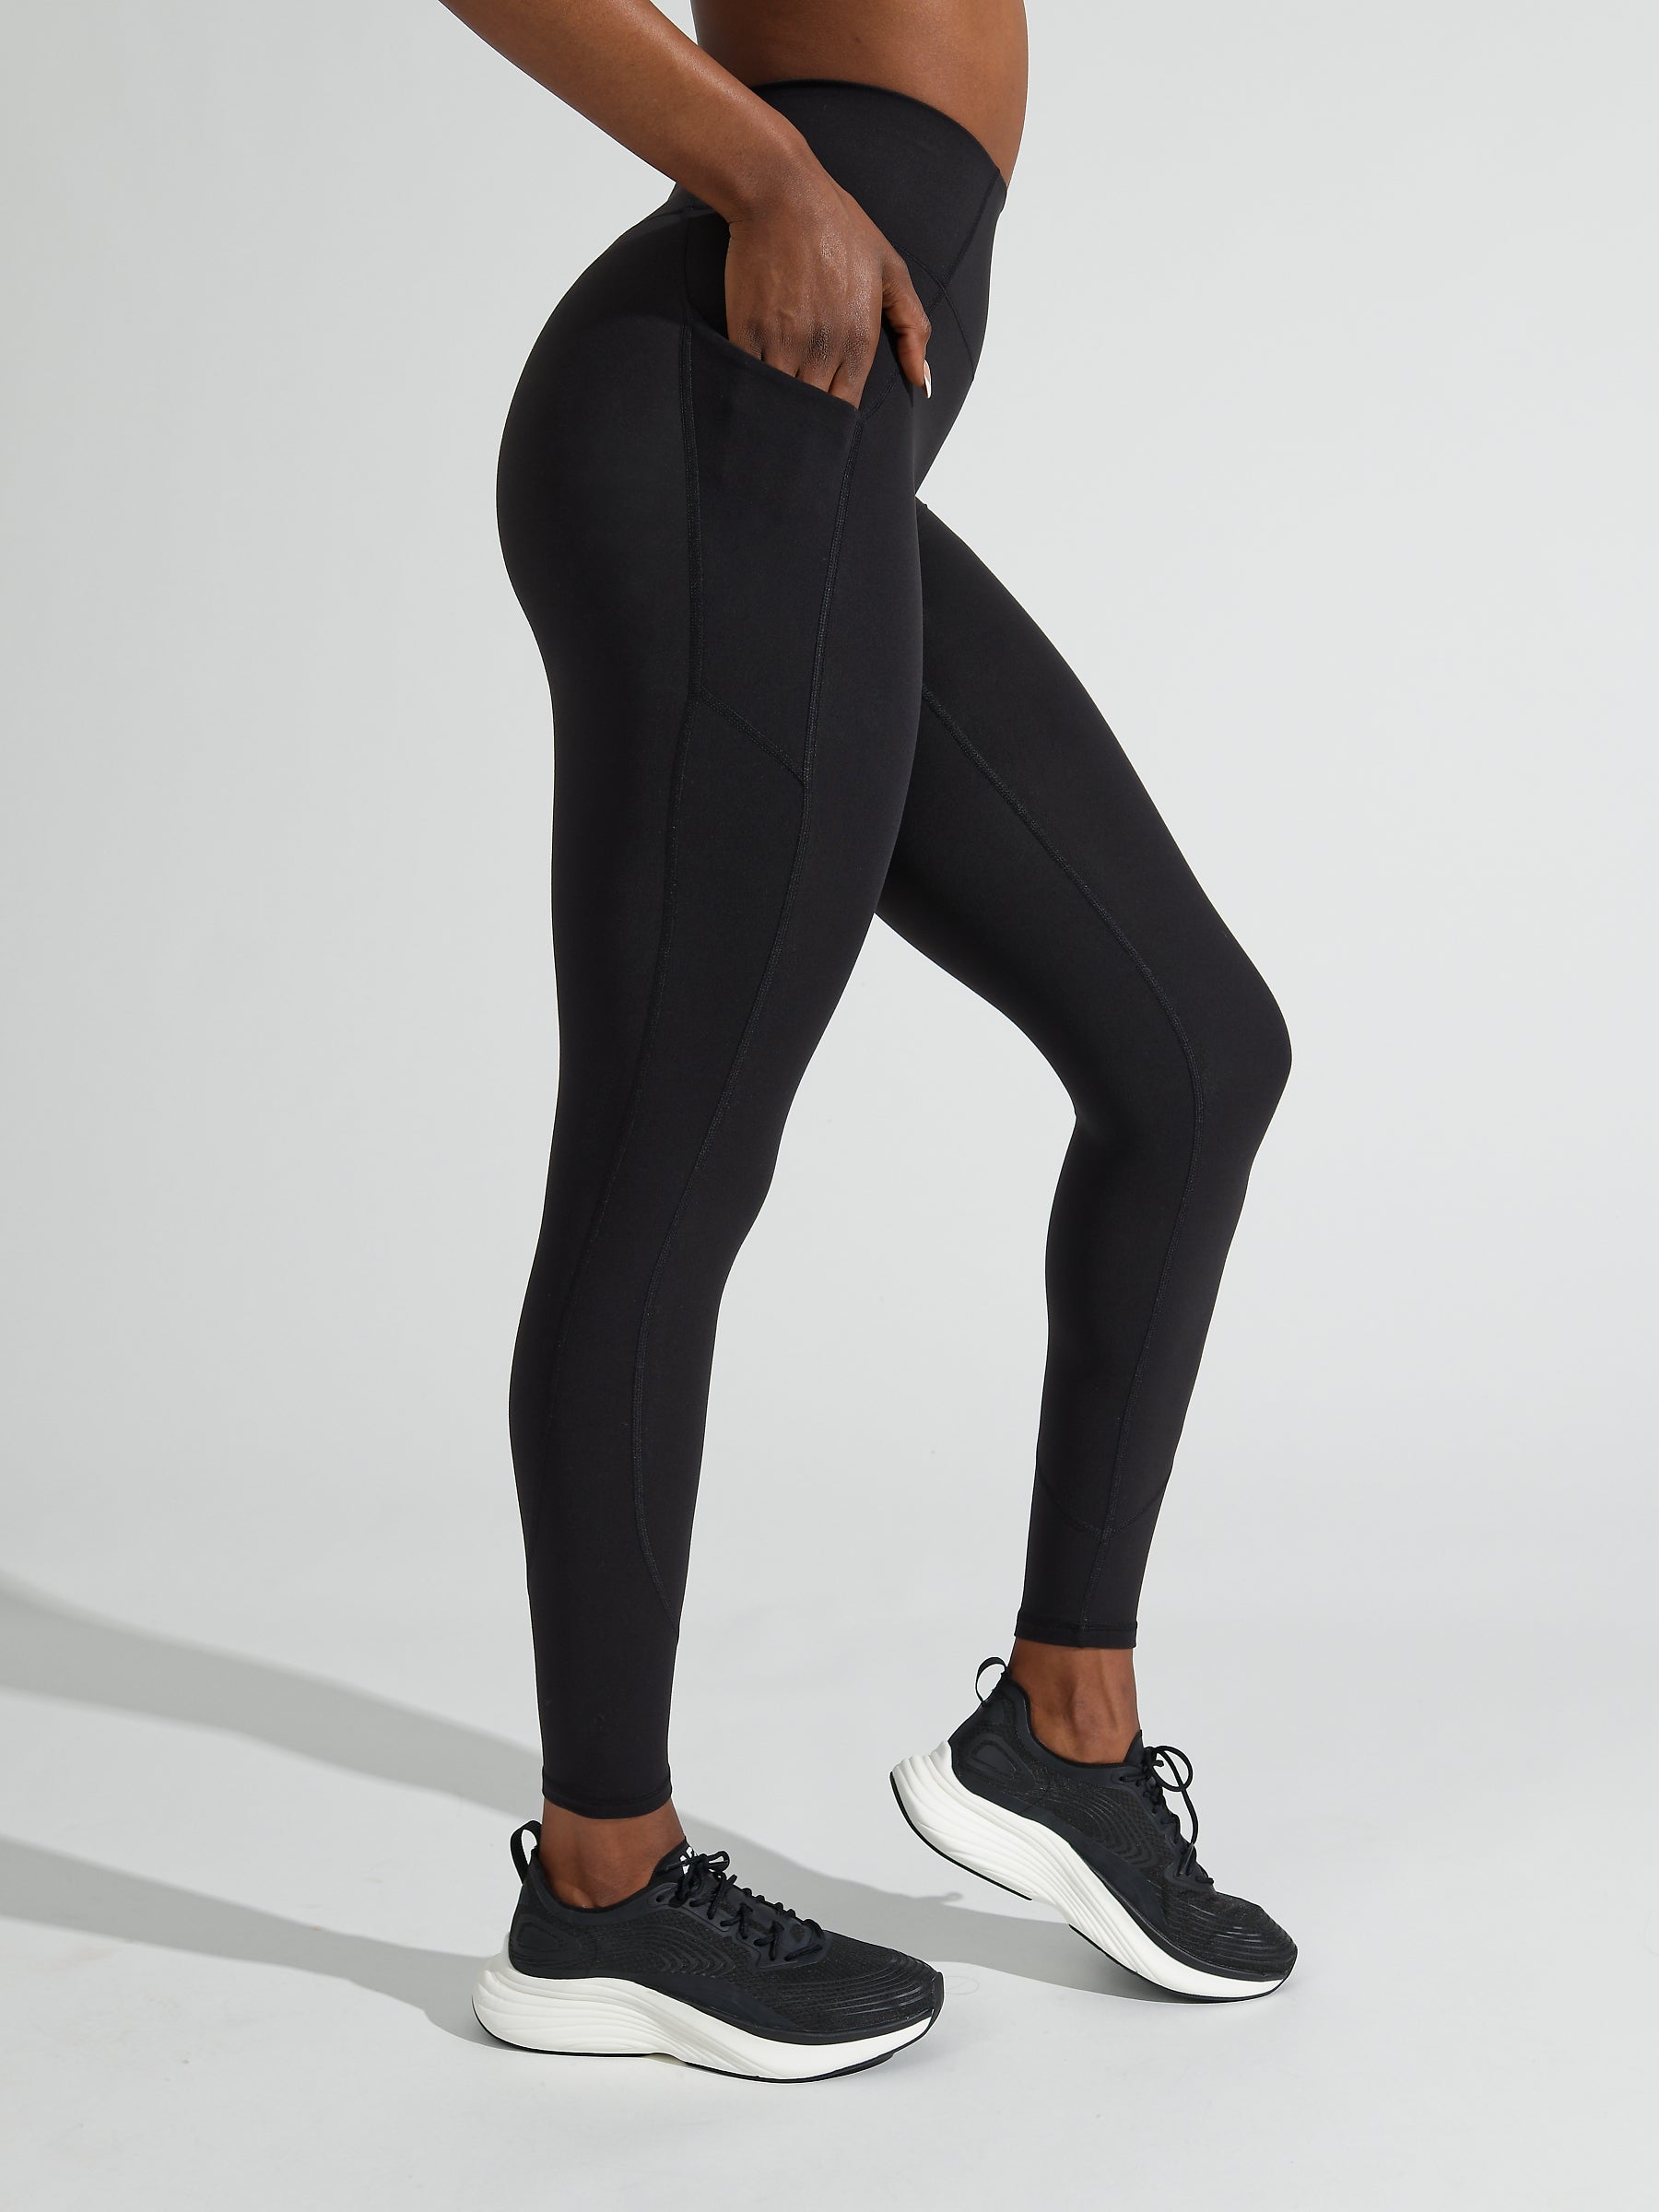 Black Pocketed Leggings  Unseen Beauty Quality Athleisure